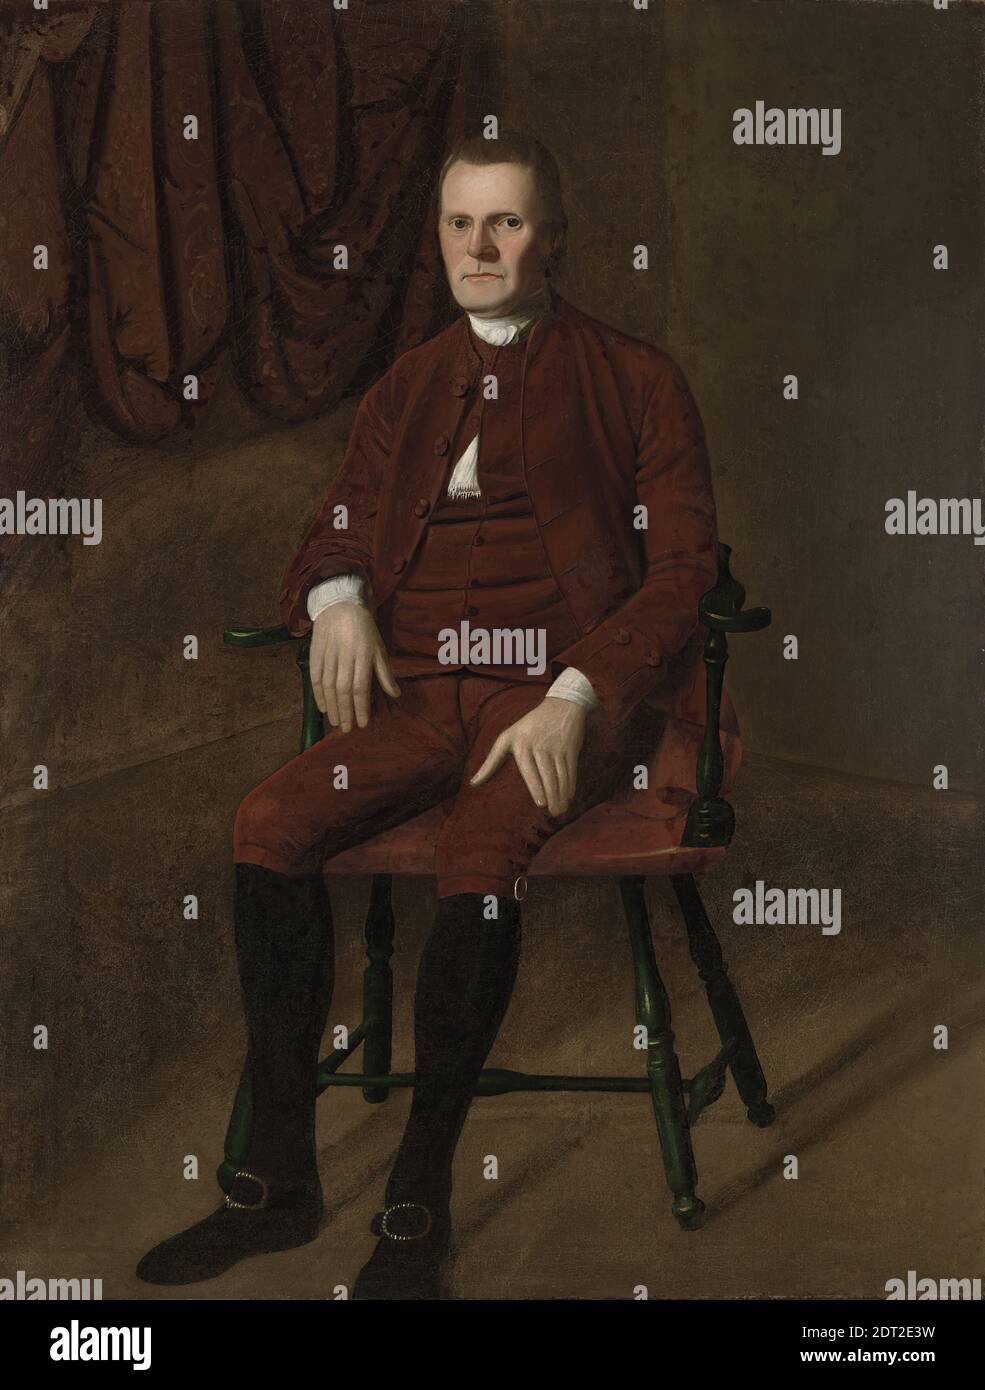 Artist: Ralph Earl, American, 1751–1801, Subject: Roger Sherman, American, 1721–1793, M.A., 1768, Roger Sherman (1721–1793, M.A. [Hon.] 1768), ca. 1775, Oil on canvas, 64 5/8 × 49 5/8 in. (164.1 × 126 cm), Connecticut statesman Roger Sherman here faces down the curious gaze of posterity with an uncompromising stare. Founding Father John Adams called him one of the soundest and strongest pillars of the Revolution even if his air is the reverse of grace. A passionate patriot, Sherman was the only man to sign all four of the early nation’s key governmental documents Stock Photo